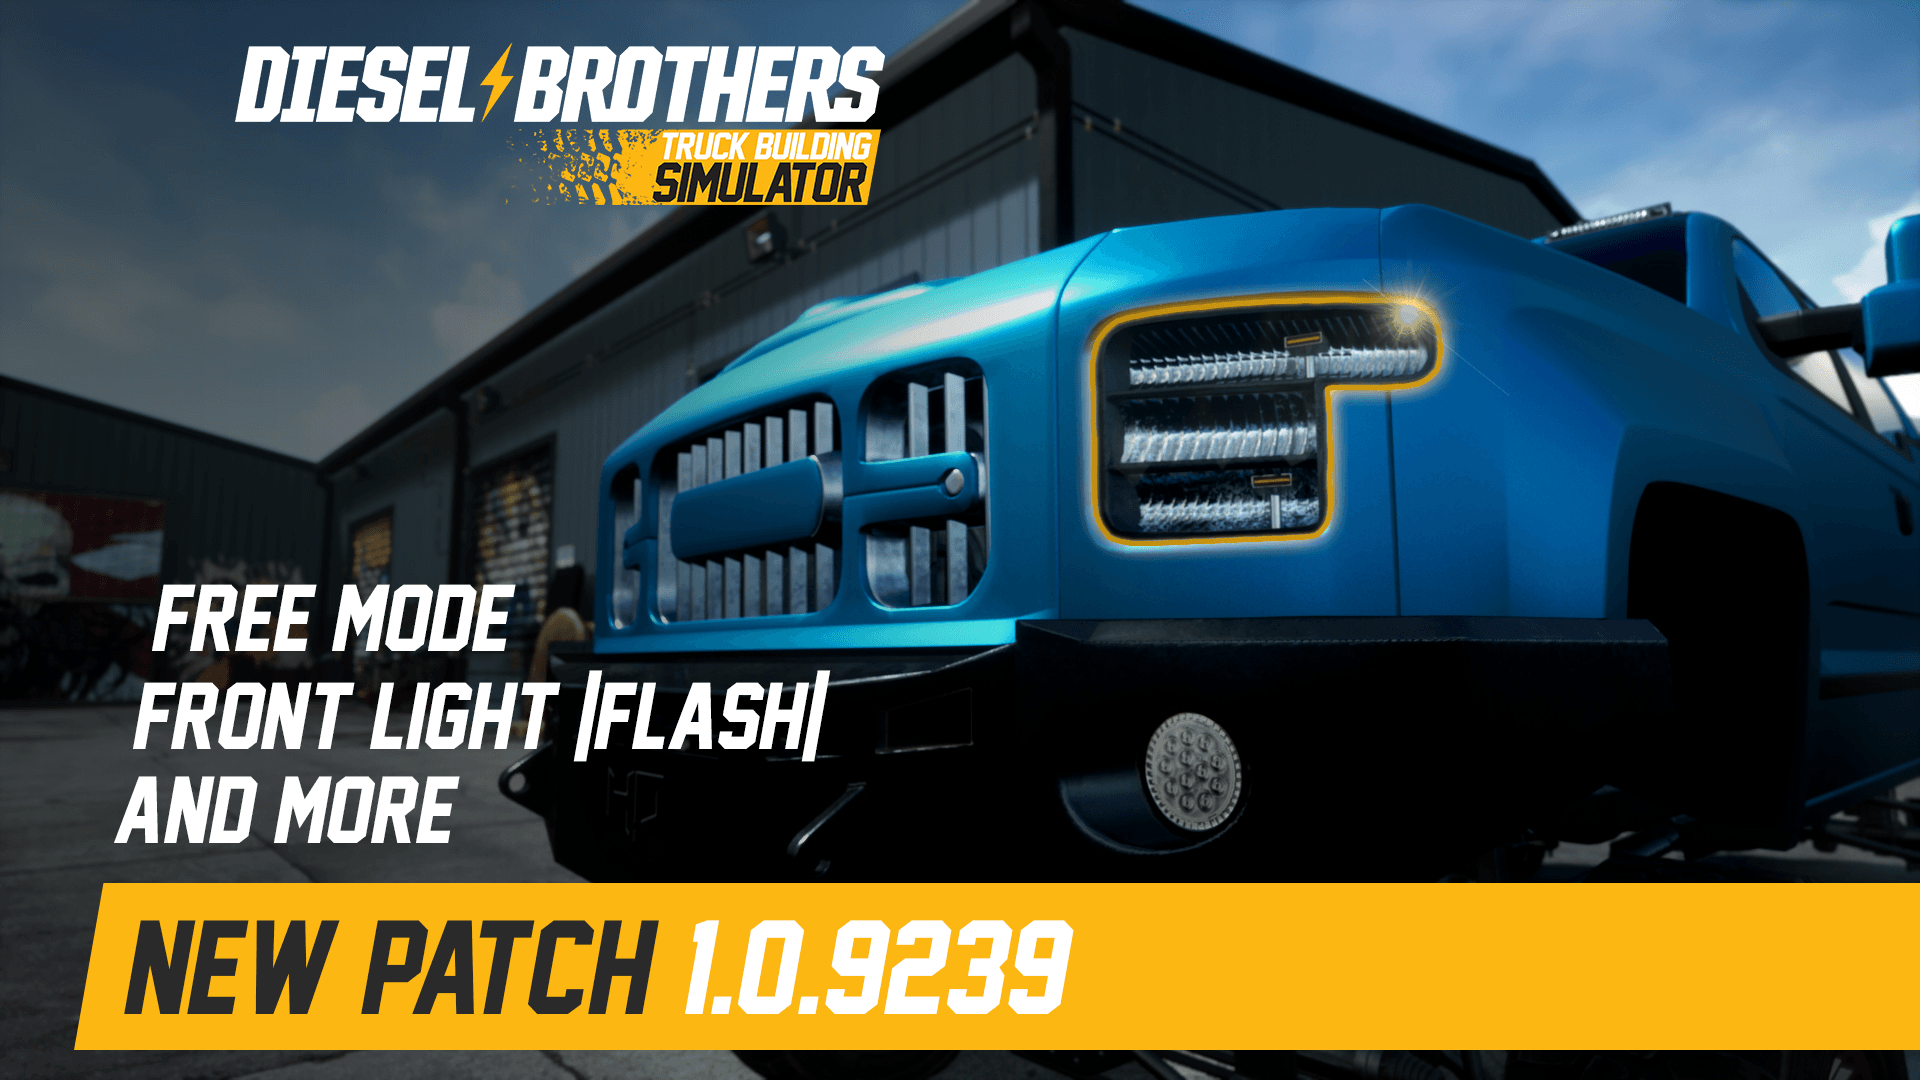 Diesel Brothers: Truck Building Simulator - Patch 1.0.9239